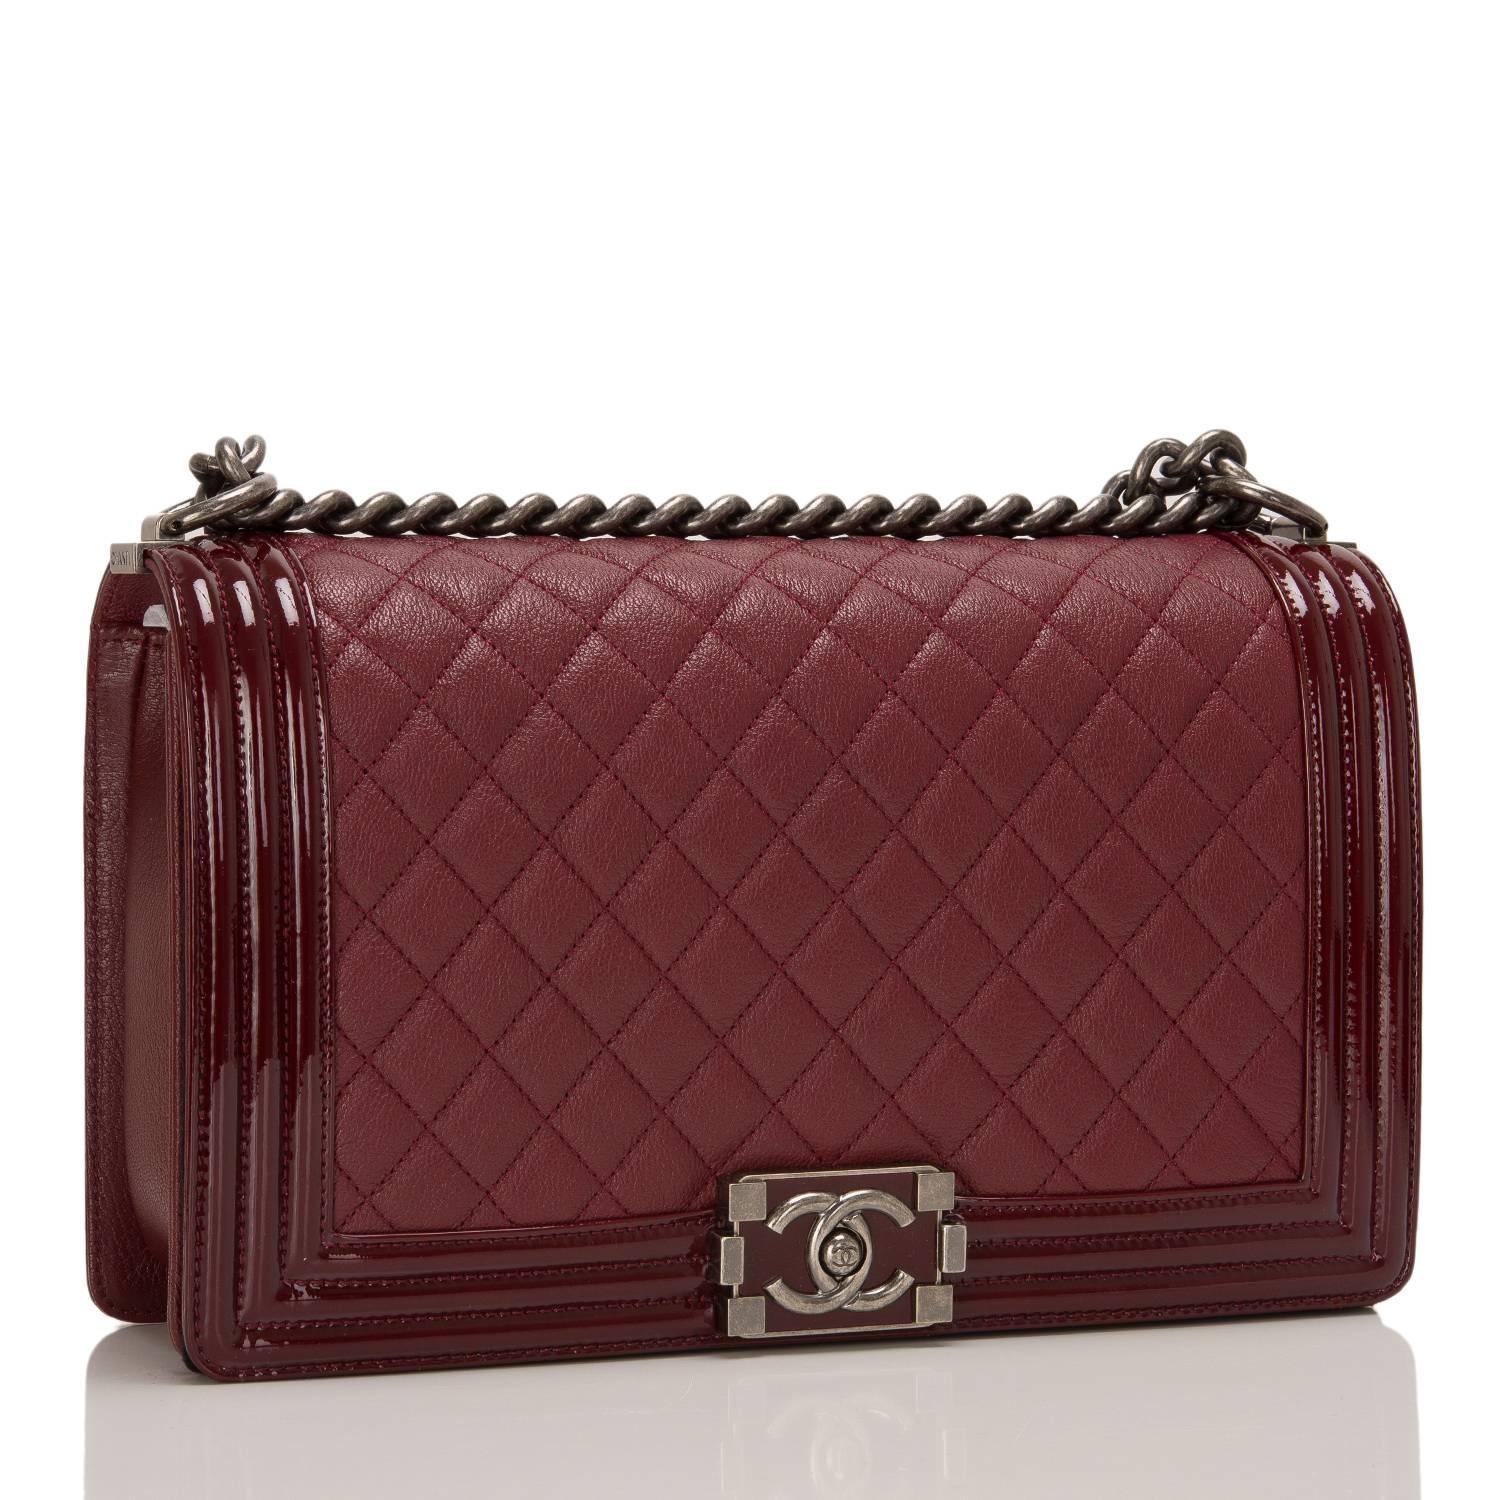 This Chanel New Medium Boy bag is made of burgundy quilted goatskin leather and accented with patent leather trim and aged ruthenium hardware.

The bag features a full front flap with a unique CC logo closure in a lacquered gloss, patent leather